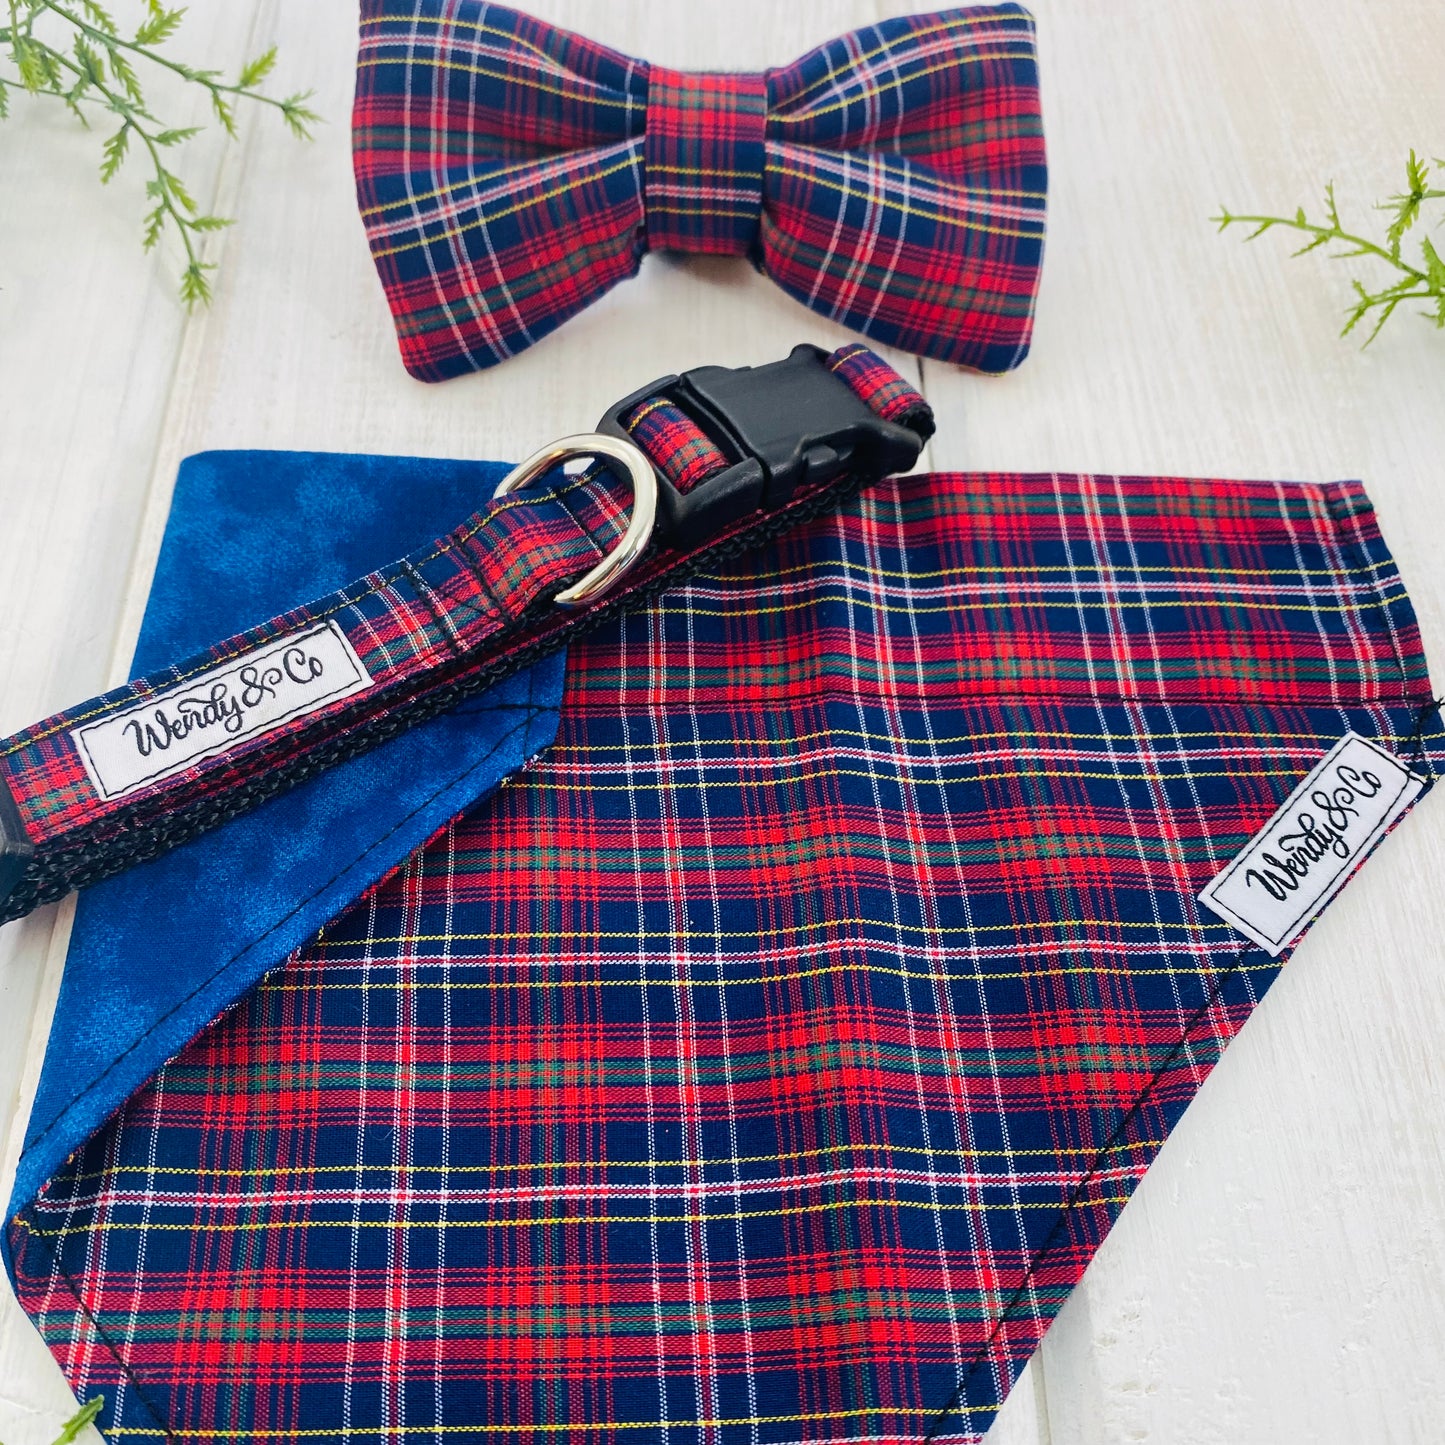 Bow tie, collar and bandana in navy and red plaid.